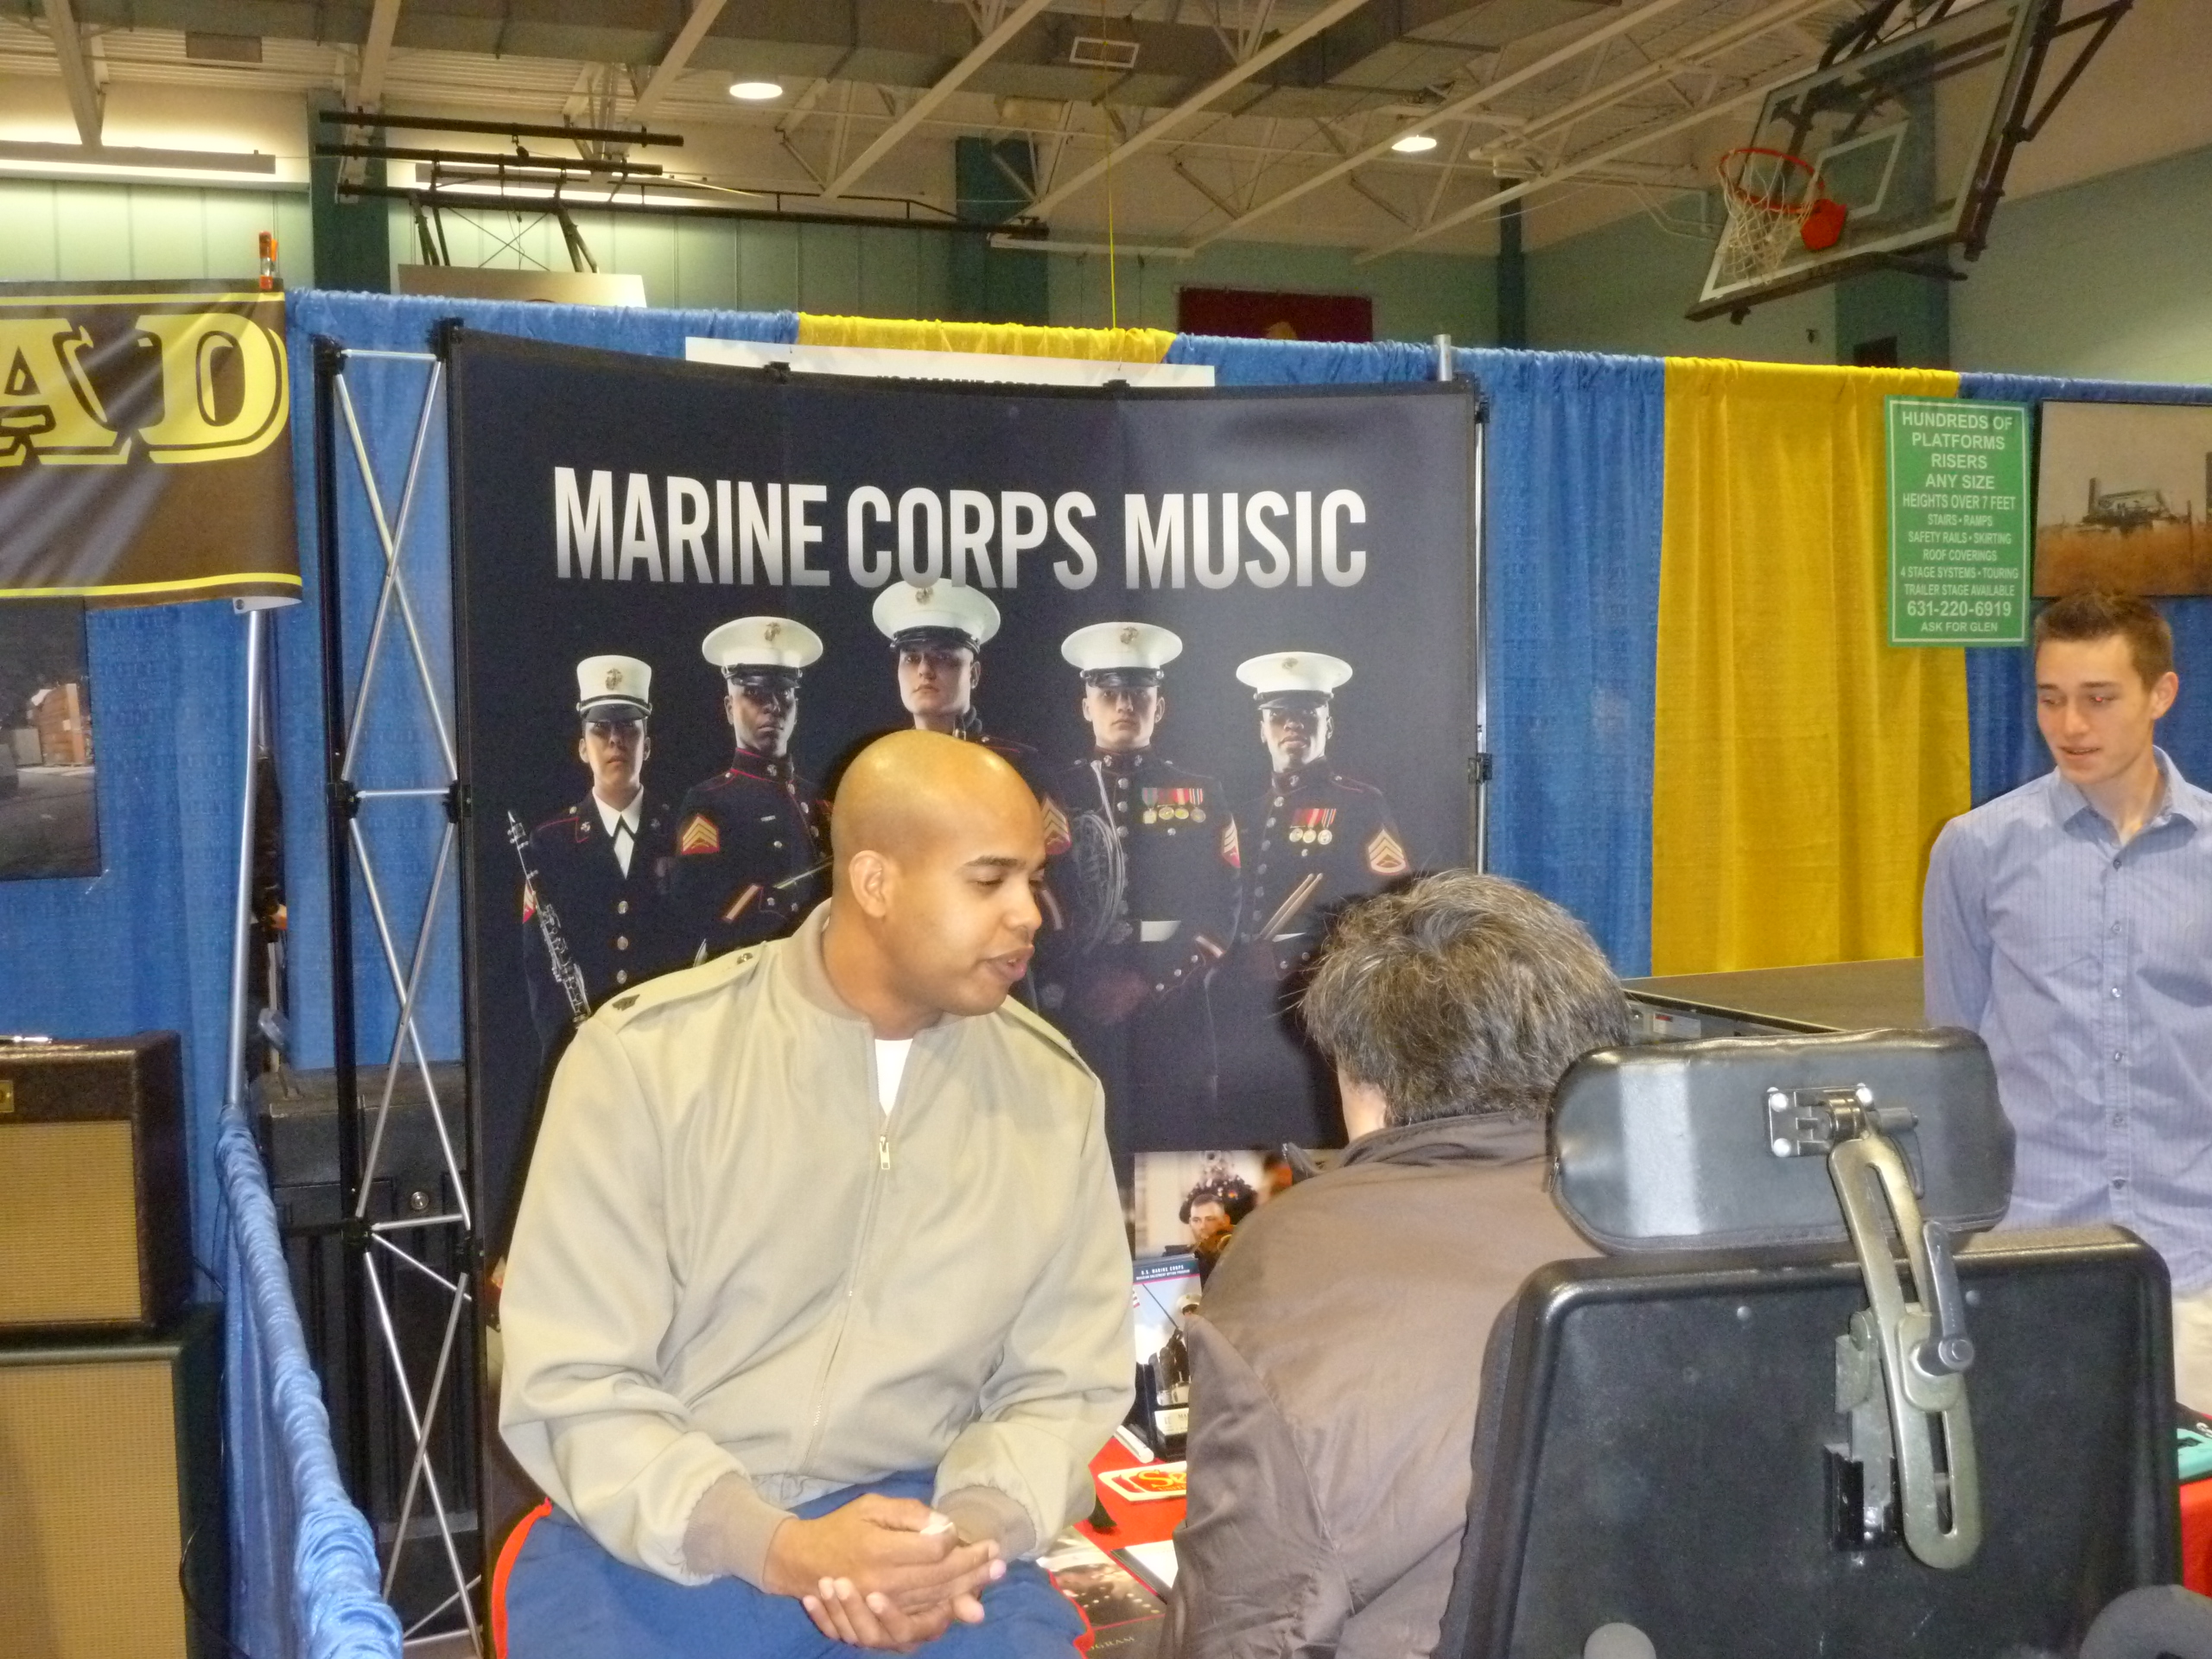 NY Guitar Show was proud and honored to have the US Marines represent.